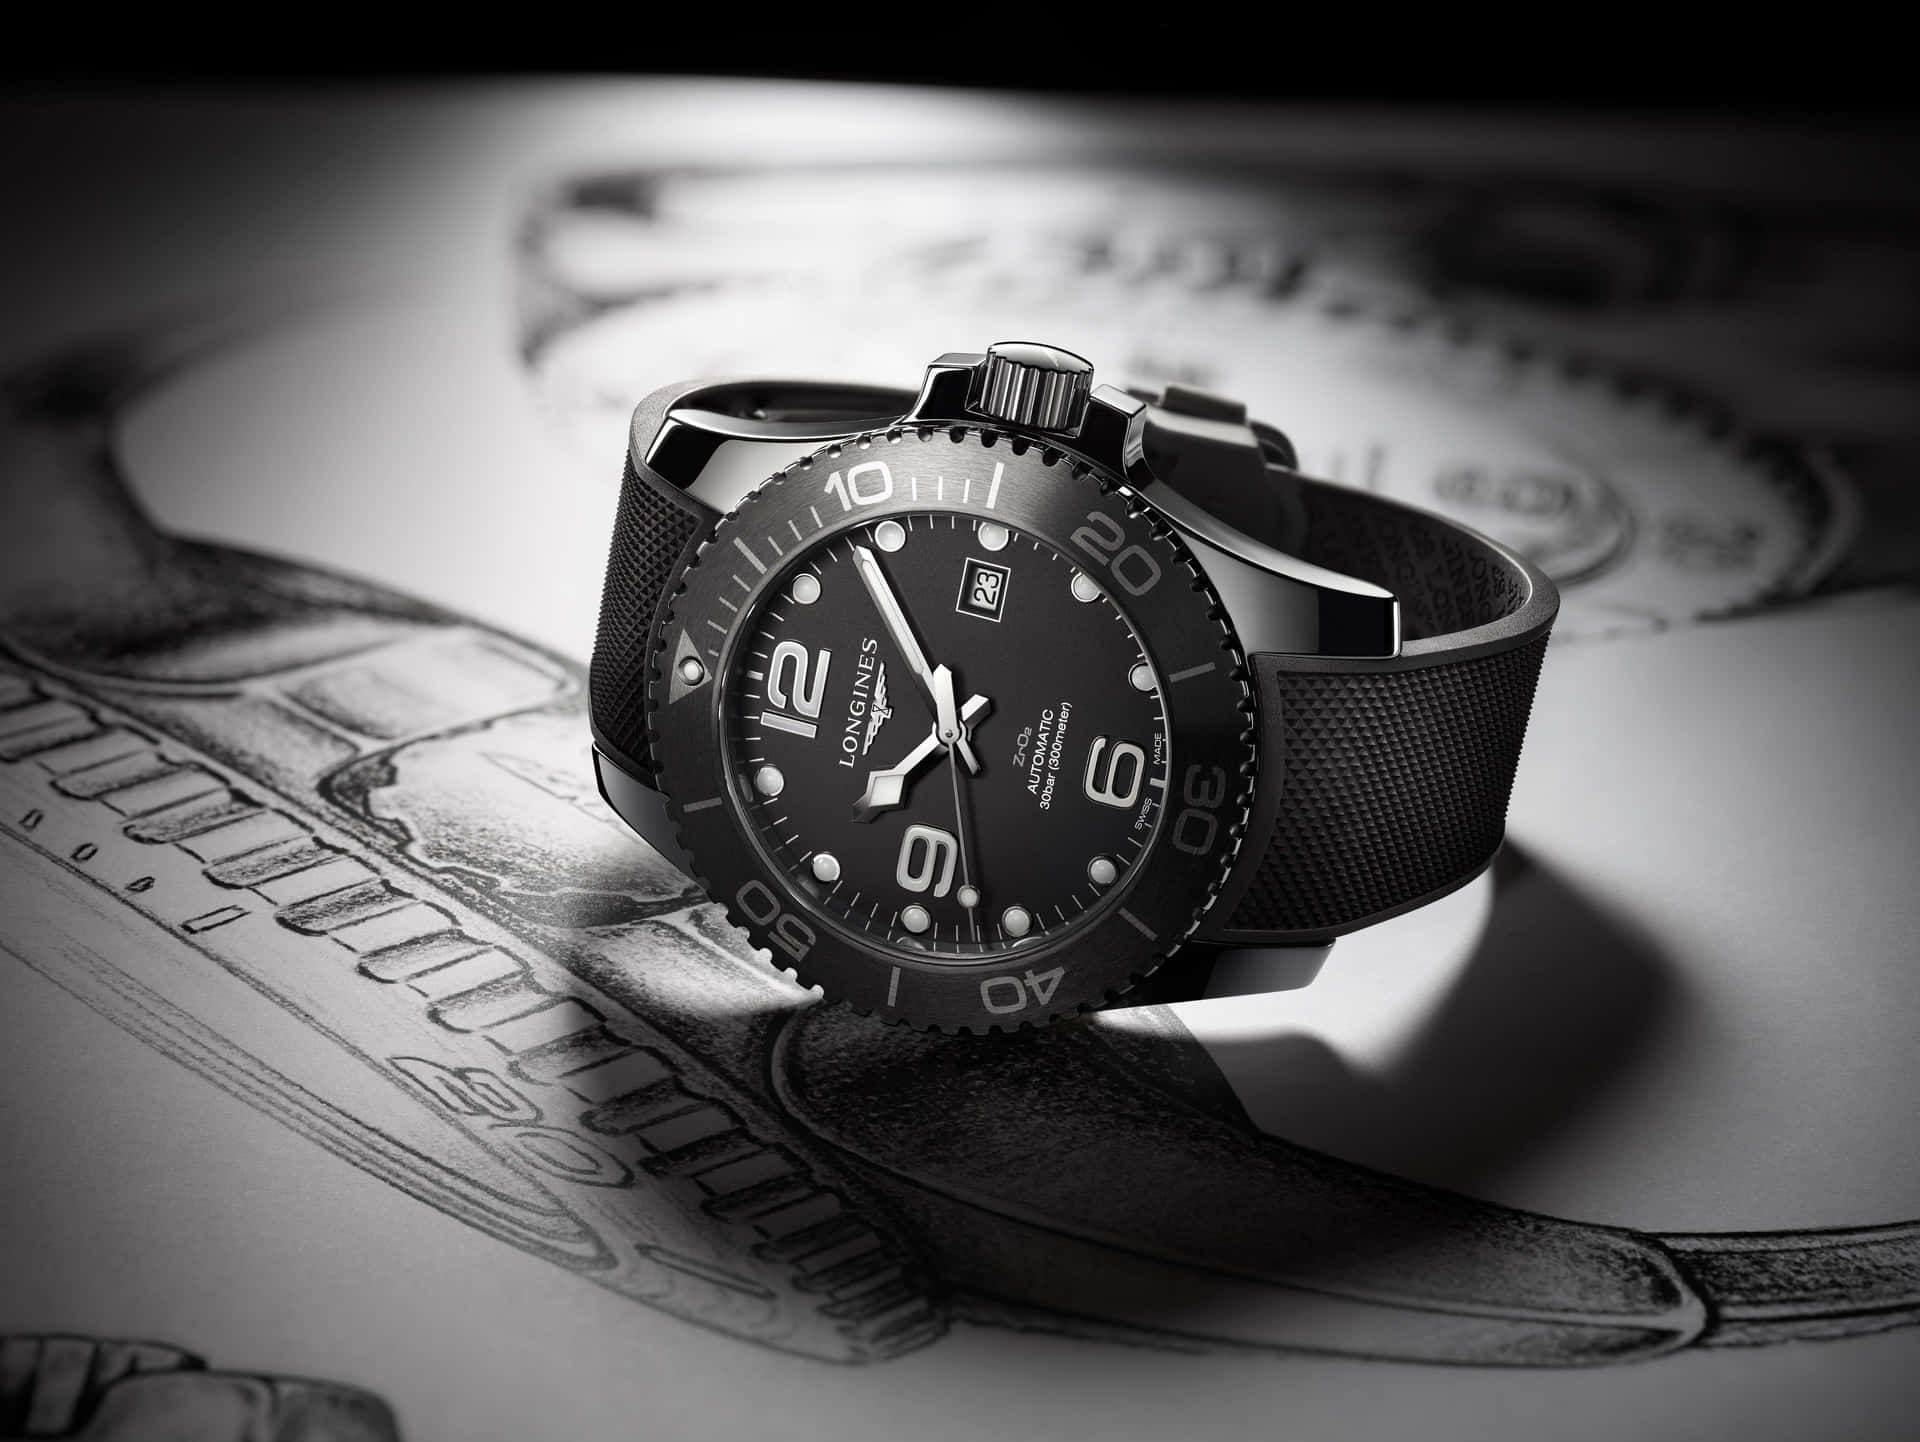 A close-up view of a high-class Longines Hydroconquest timepiece on a sketchpad Wallpaper